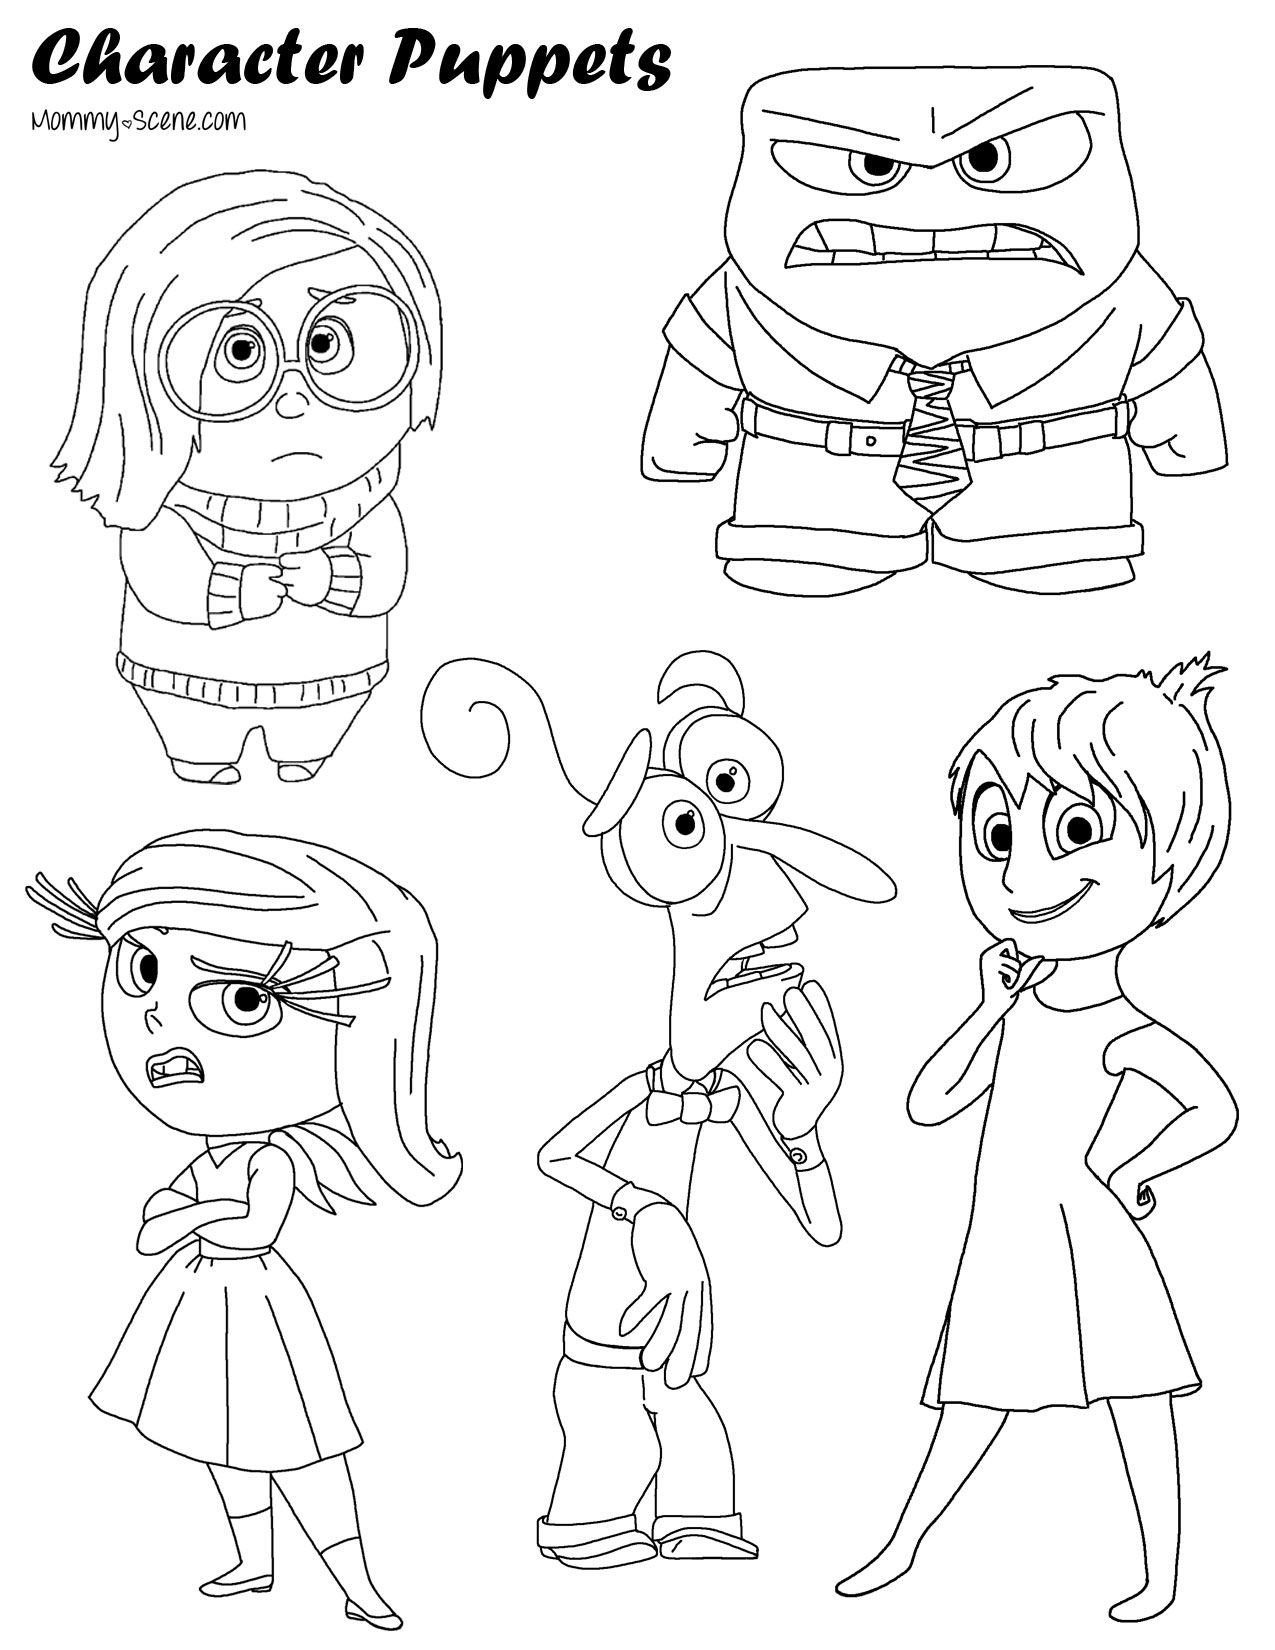 Therapeutic Coloring Pages For Kids
 Paper Character Puppets